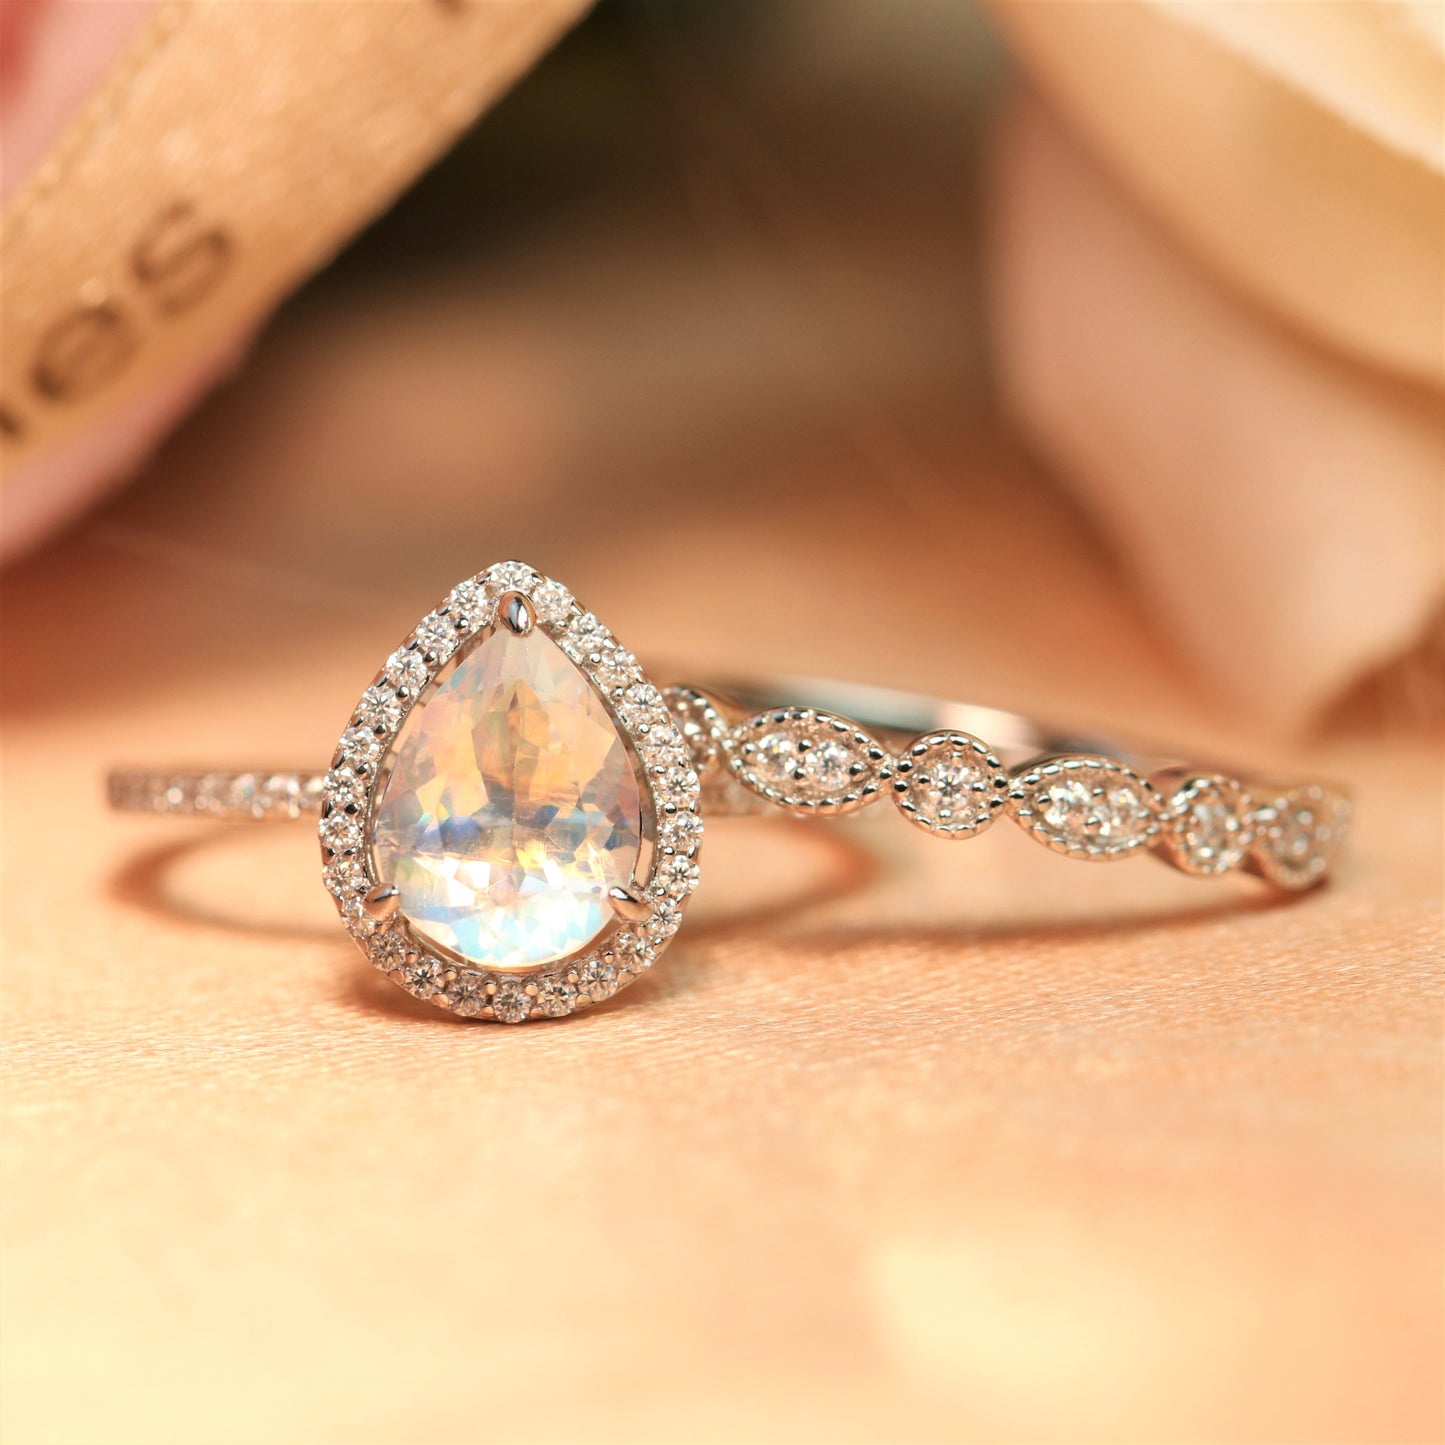 Perfect 1.65 carat Rainbow Moonstone Tear Drop Wedding Ring Set with Matching Eternity Wedding Ring Band in White Gold